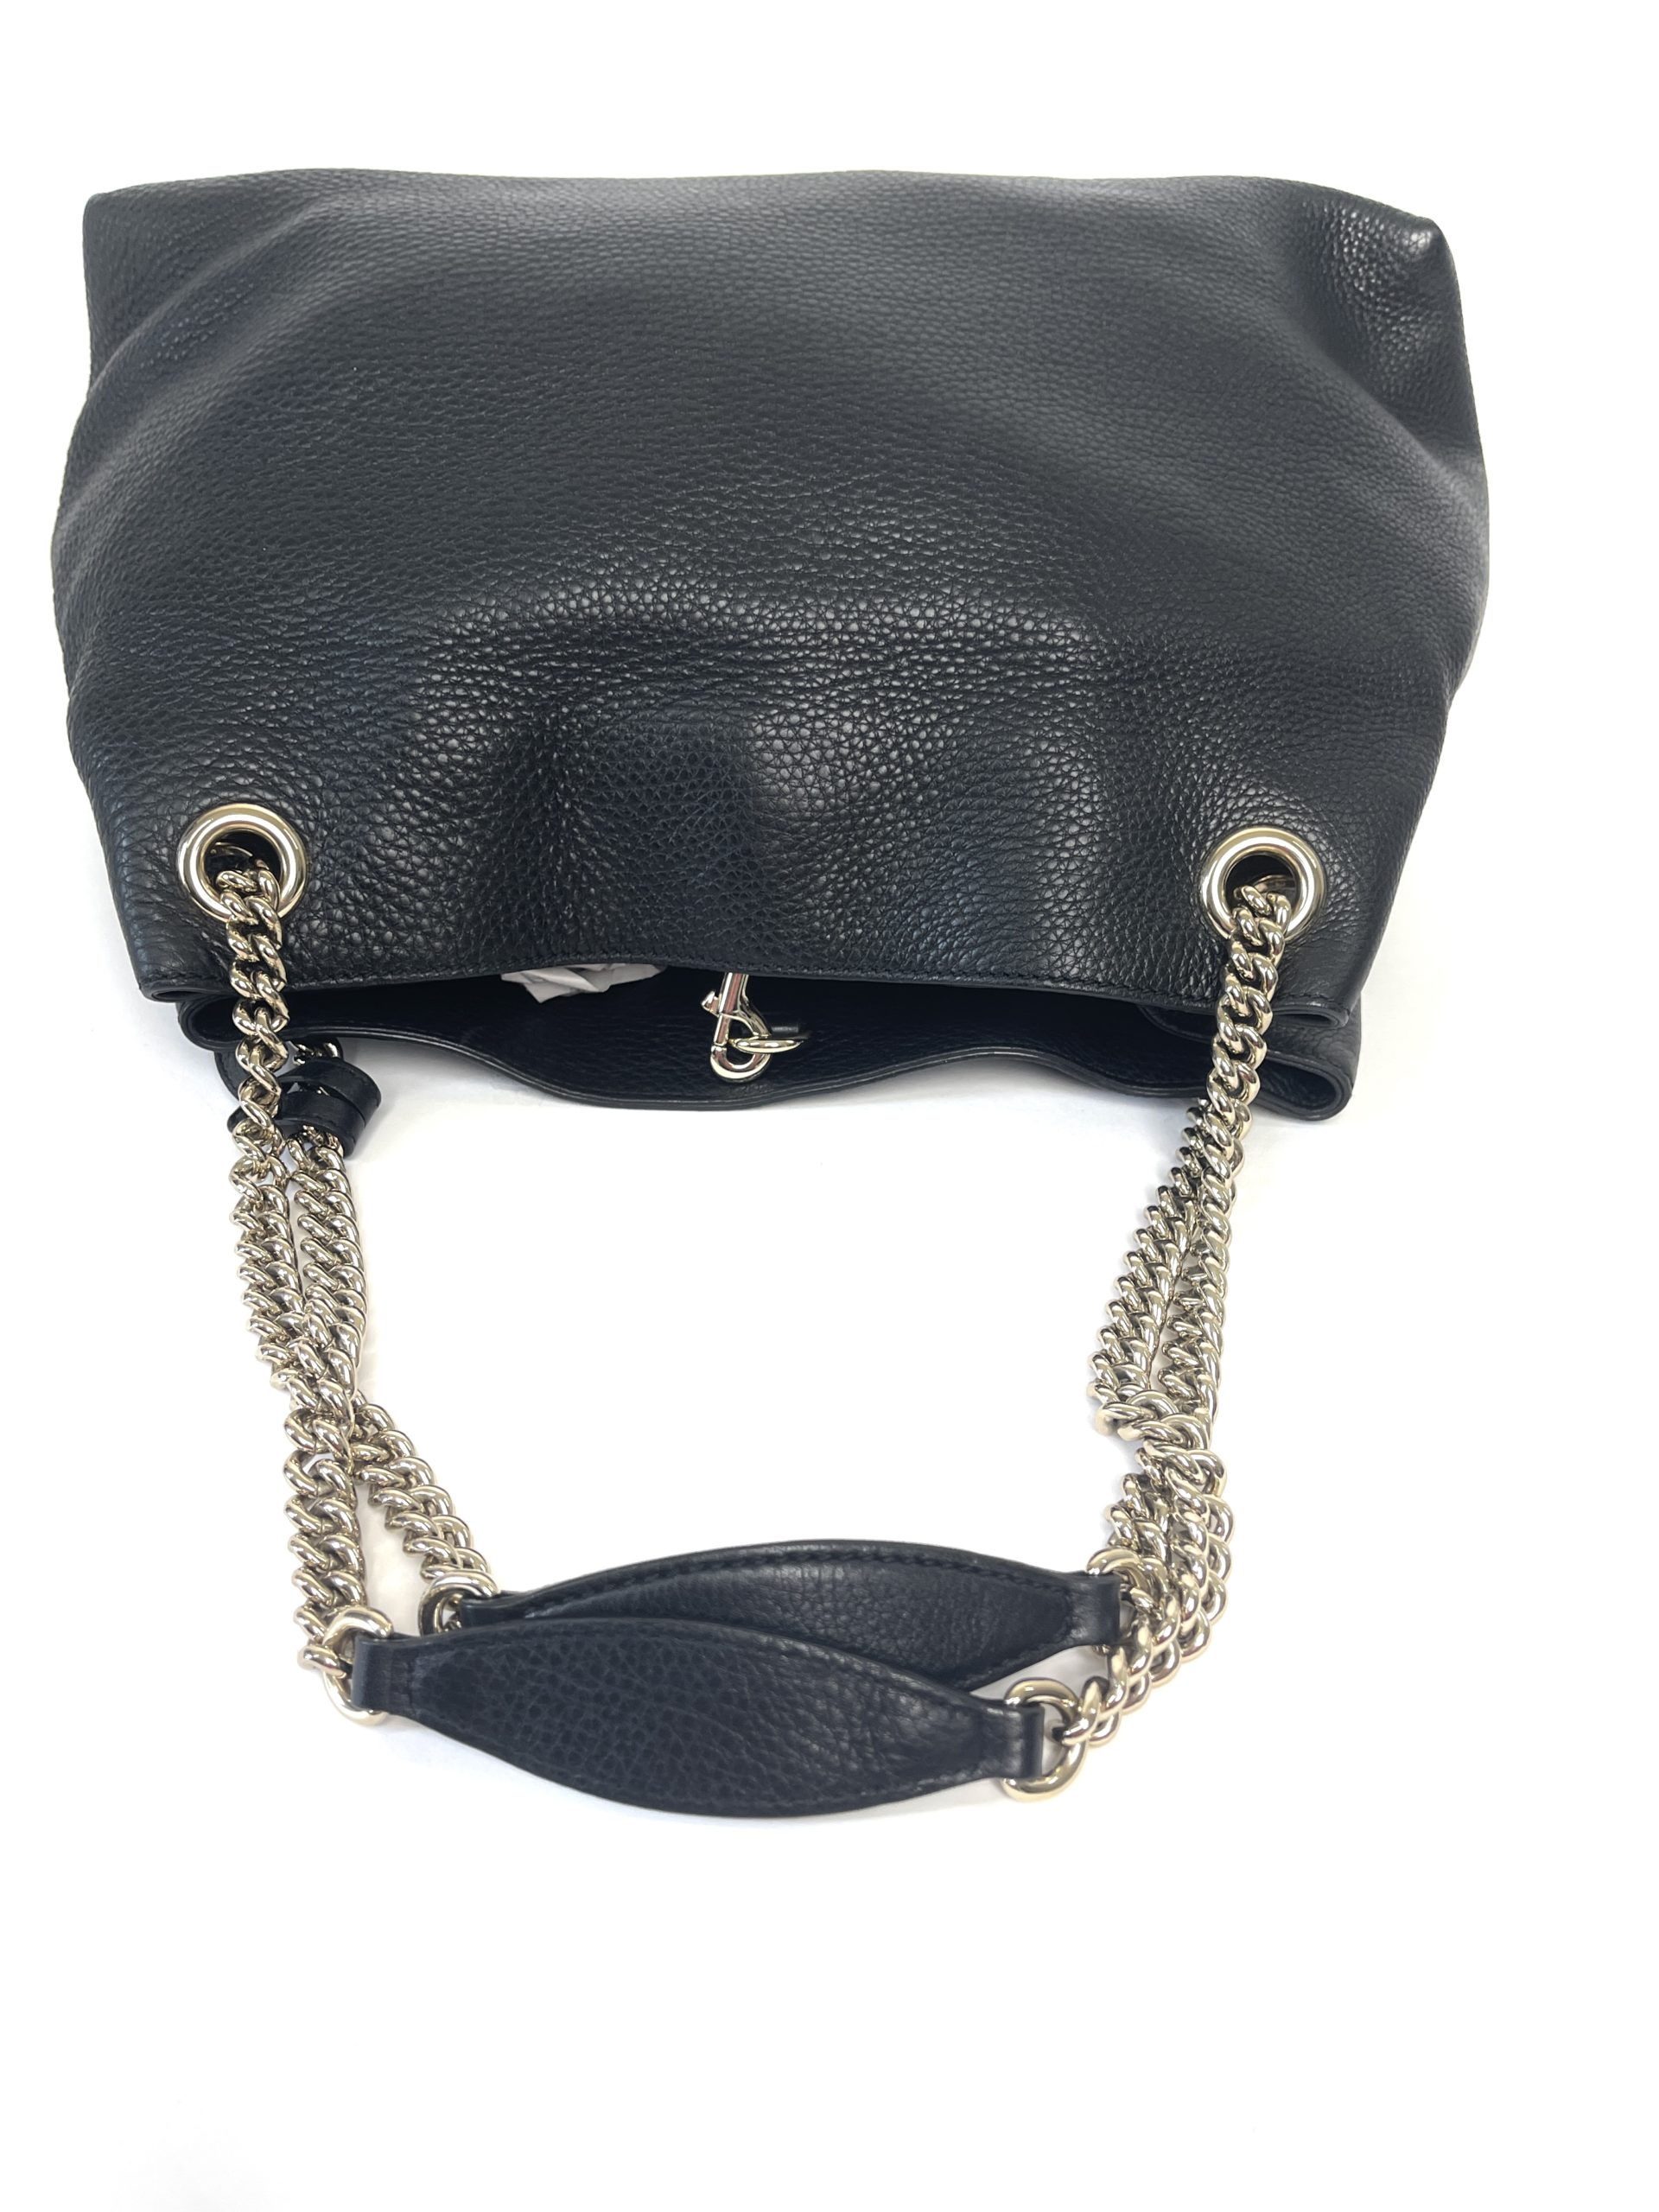 Gucci Soho Pebbled Chain Hobo Bag Medium White in Leather with Gold-tone -  US